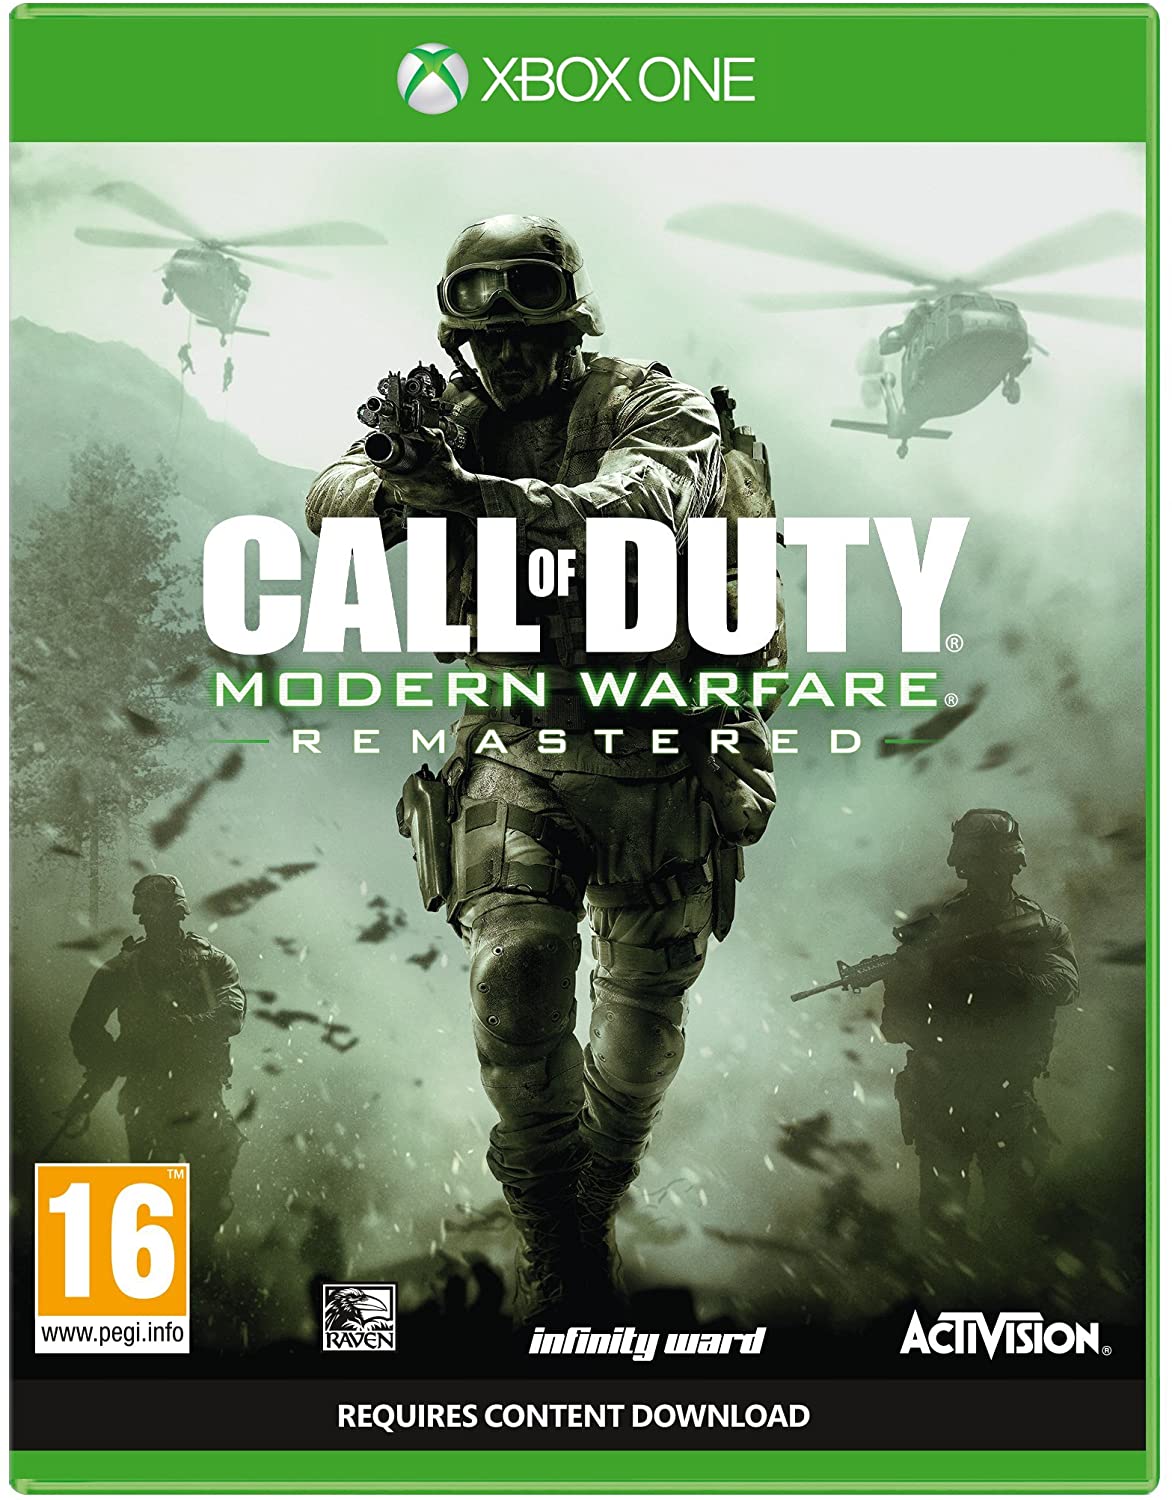 Buy Call of Duty: Modern Warfare 2 Campaign Remastered Xbox One Key